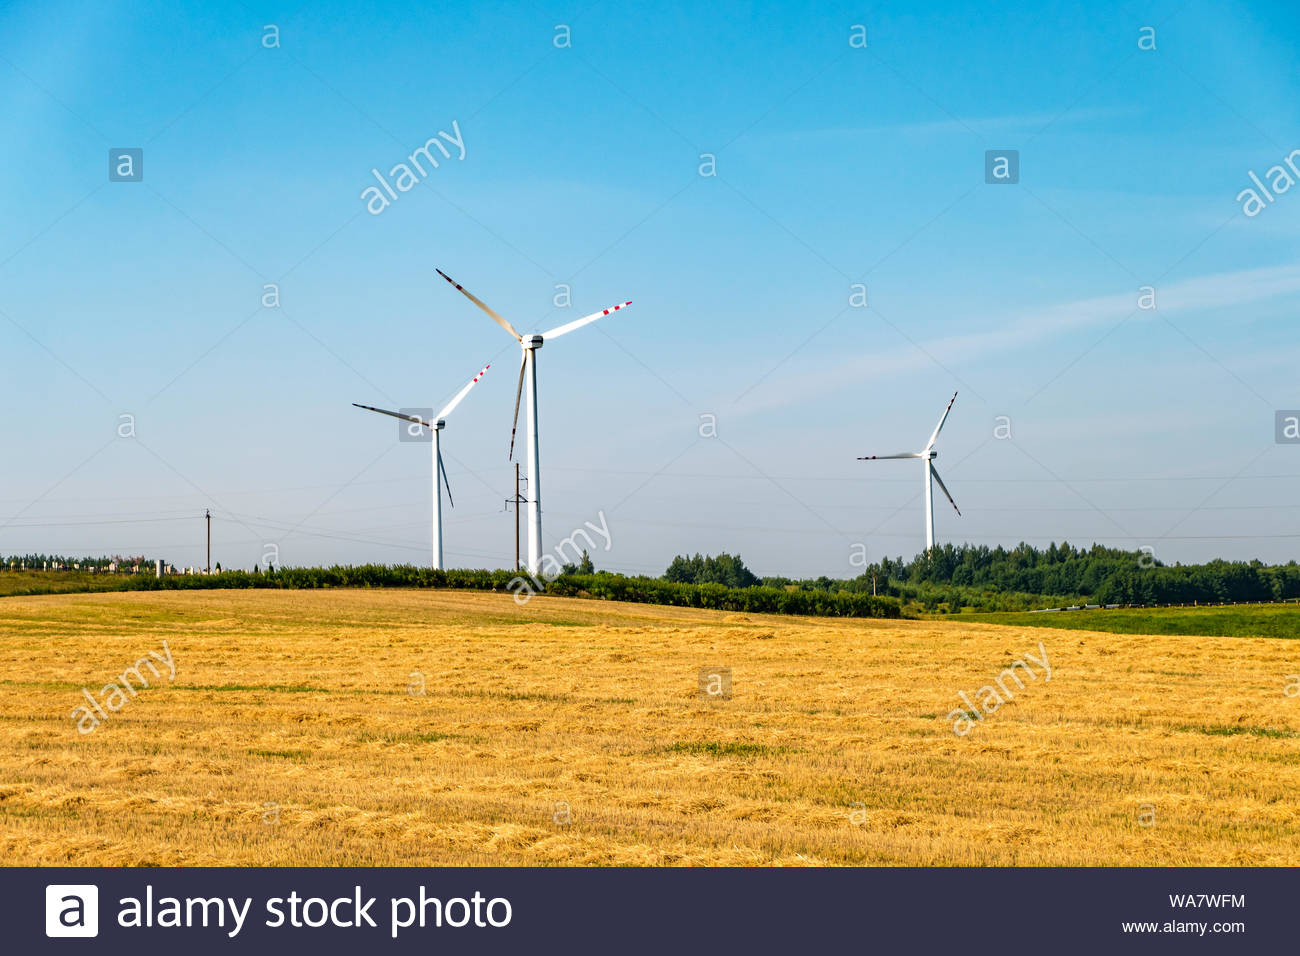 Rotating Blades Of A Windmill Propeller On Blue Sky Background